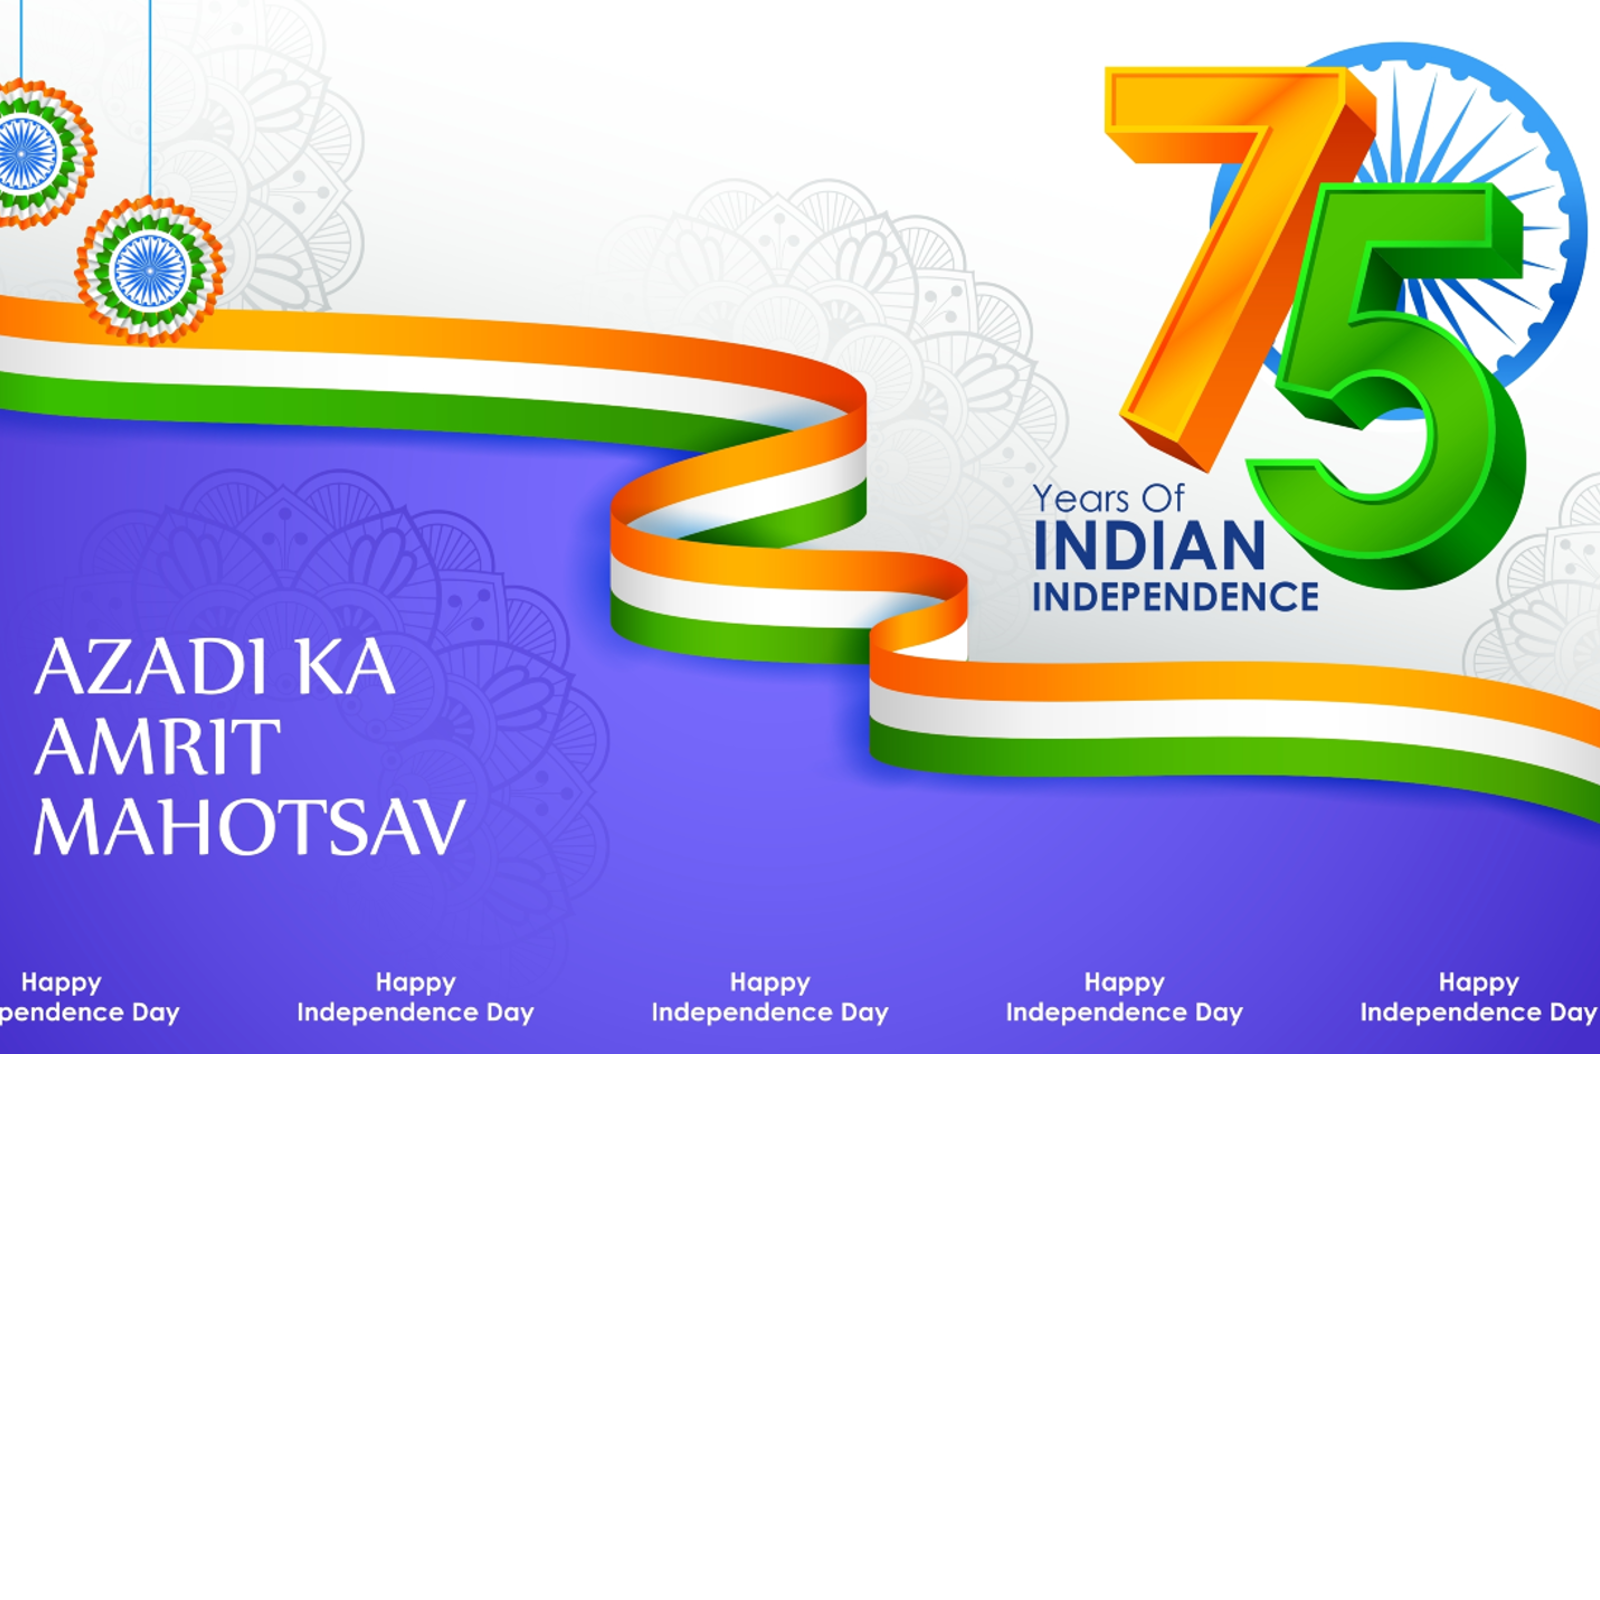 Independence Day 2022: What is Azadi Ka Amrit Mahotsav and Why was it Launched? All You Need to Know